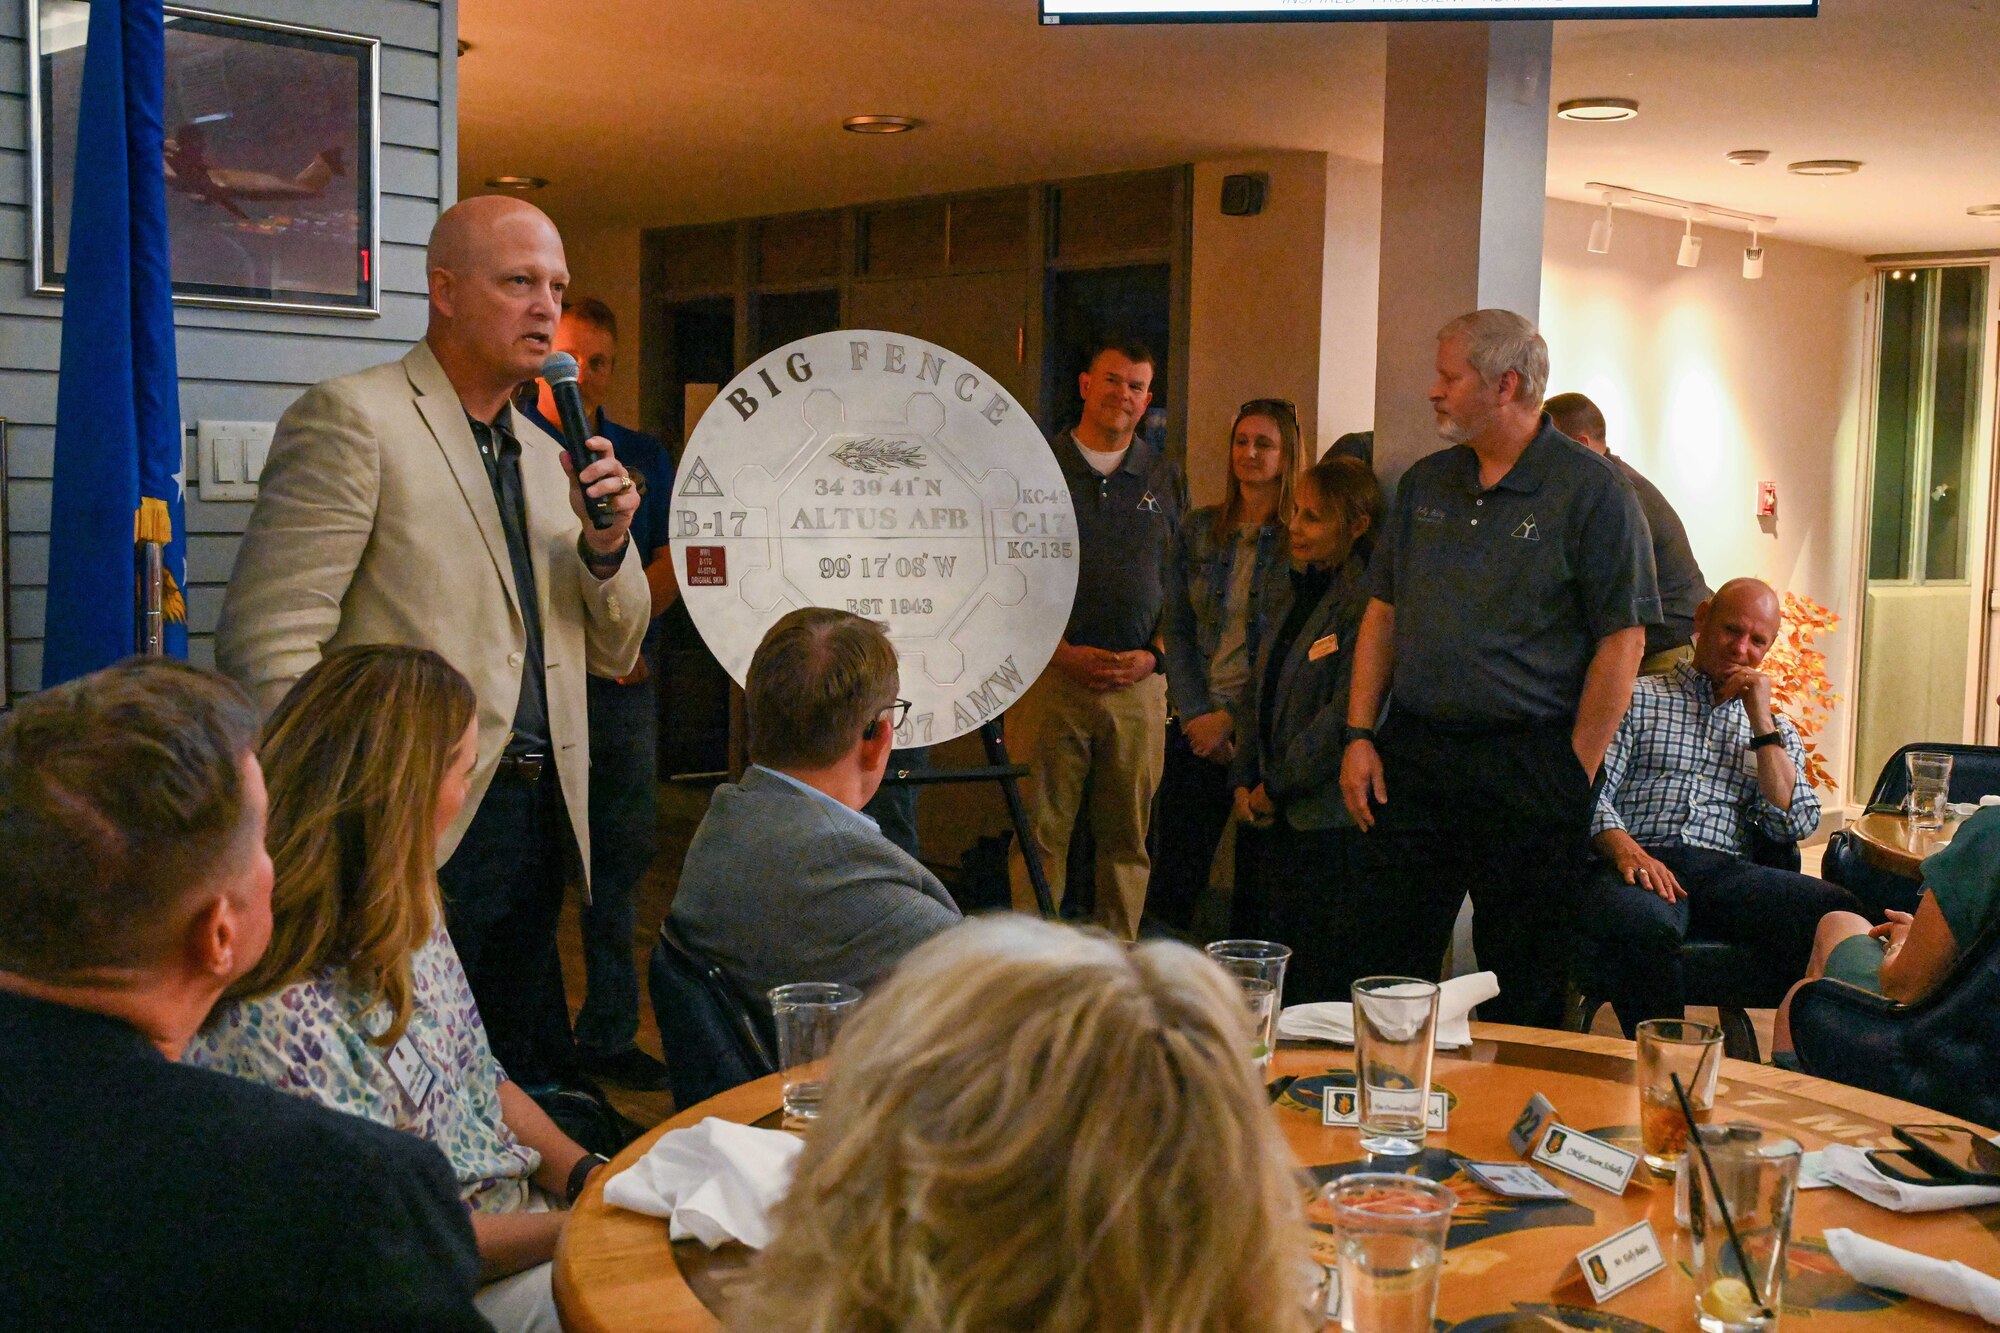 Col. Blaine Baker, 97th Air Mobility Wing commander, reveals a replica of a navigational aid used by the 97th Bombardment Group during WWII at Charlie’s Lounge, at Altus Air Force Base, Oklahoma, April 13, 2023. During the event, Charlie’s was recognized as a historical marker in honor of “Big Fence”, a navigational aid call sign used during World War II to guide aircraft and aircrews to safety. (U.S. Air Force photo by Airman 1st Class Miyah Gray)